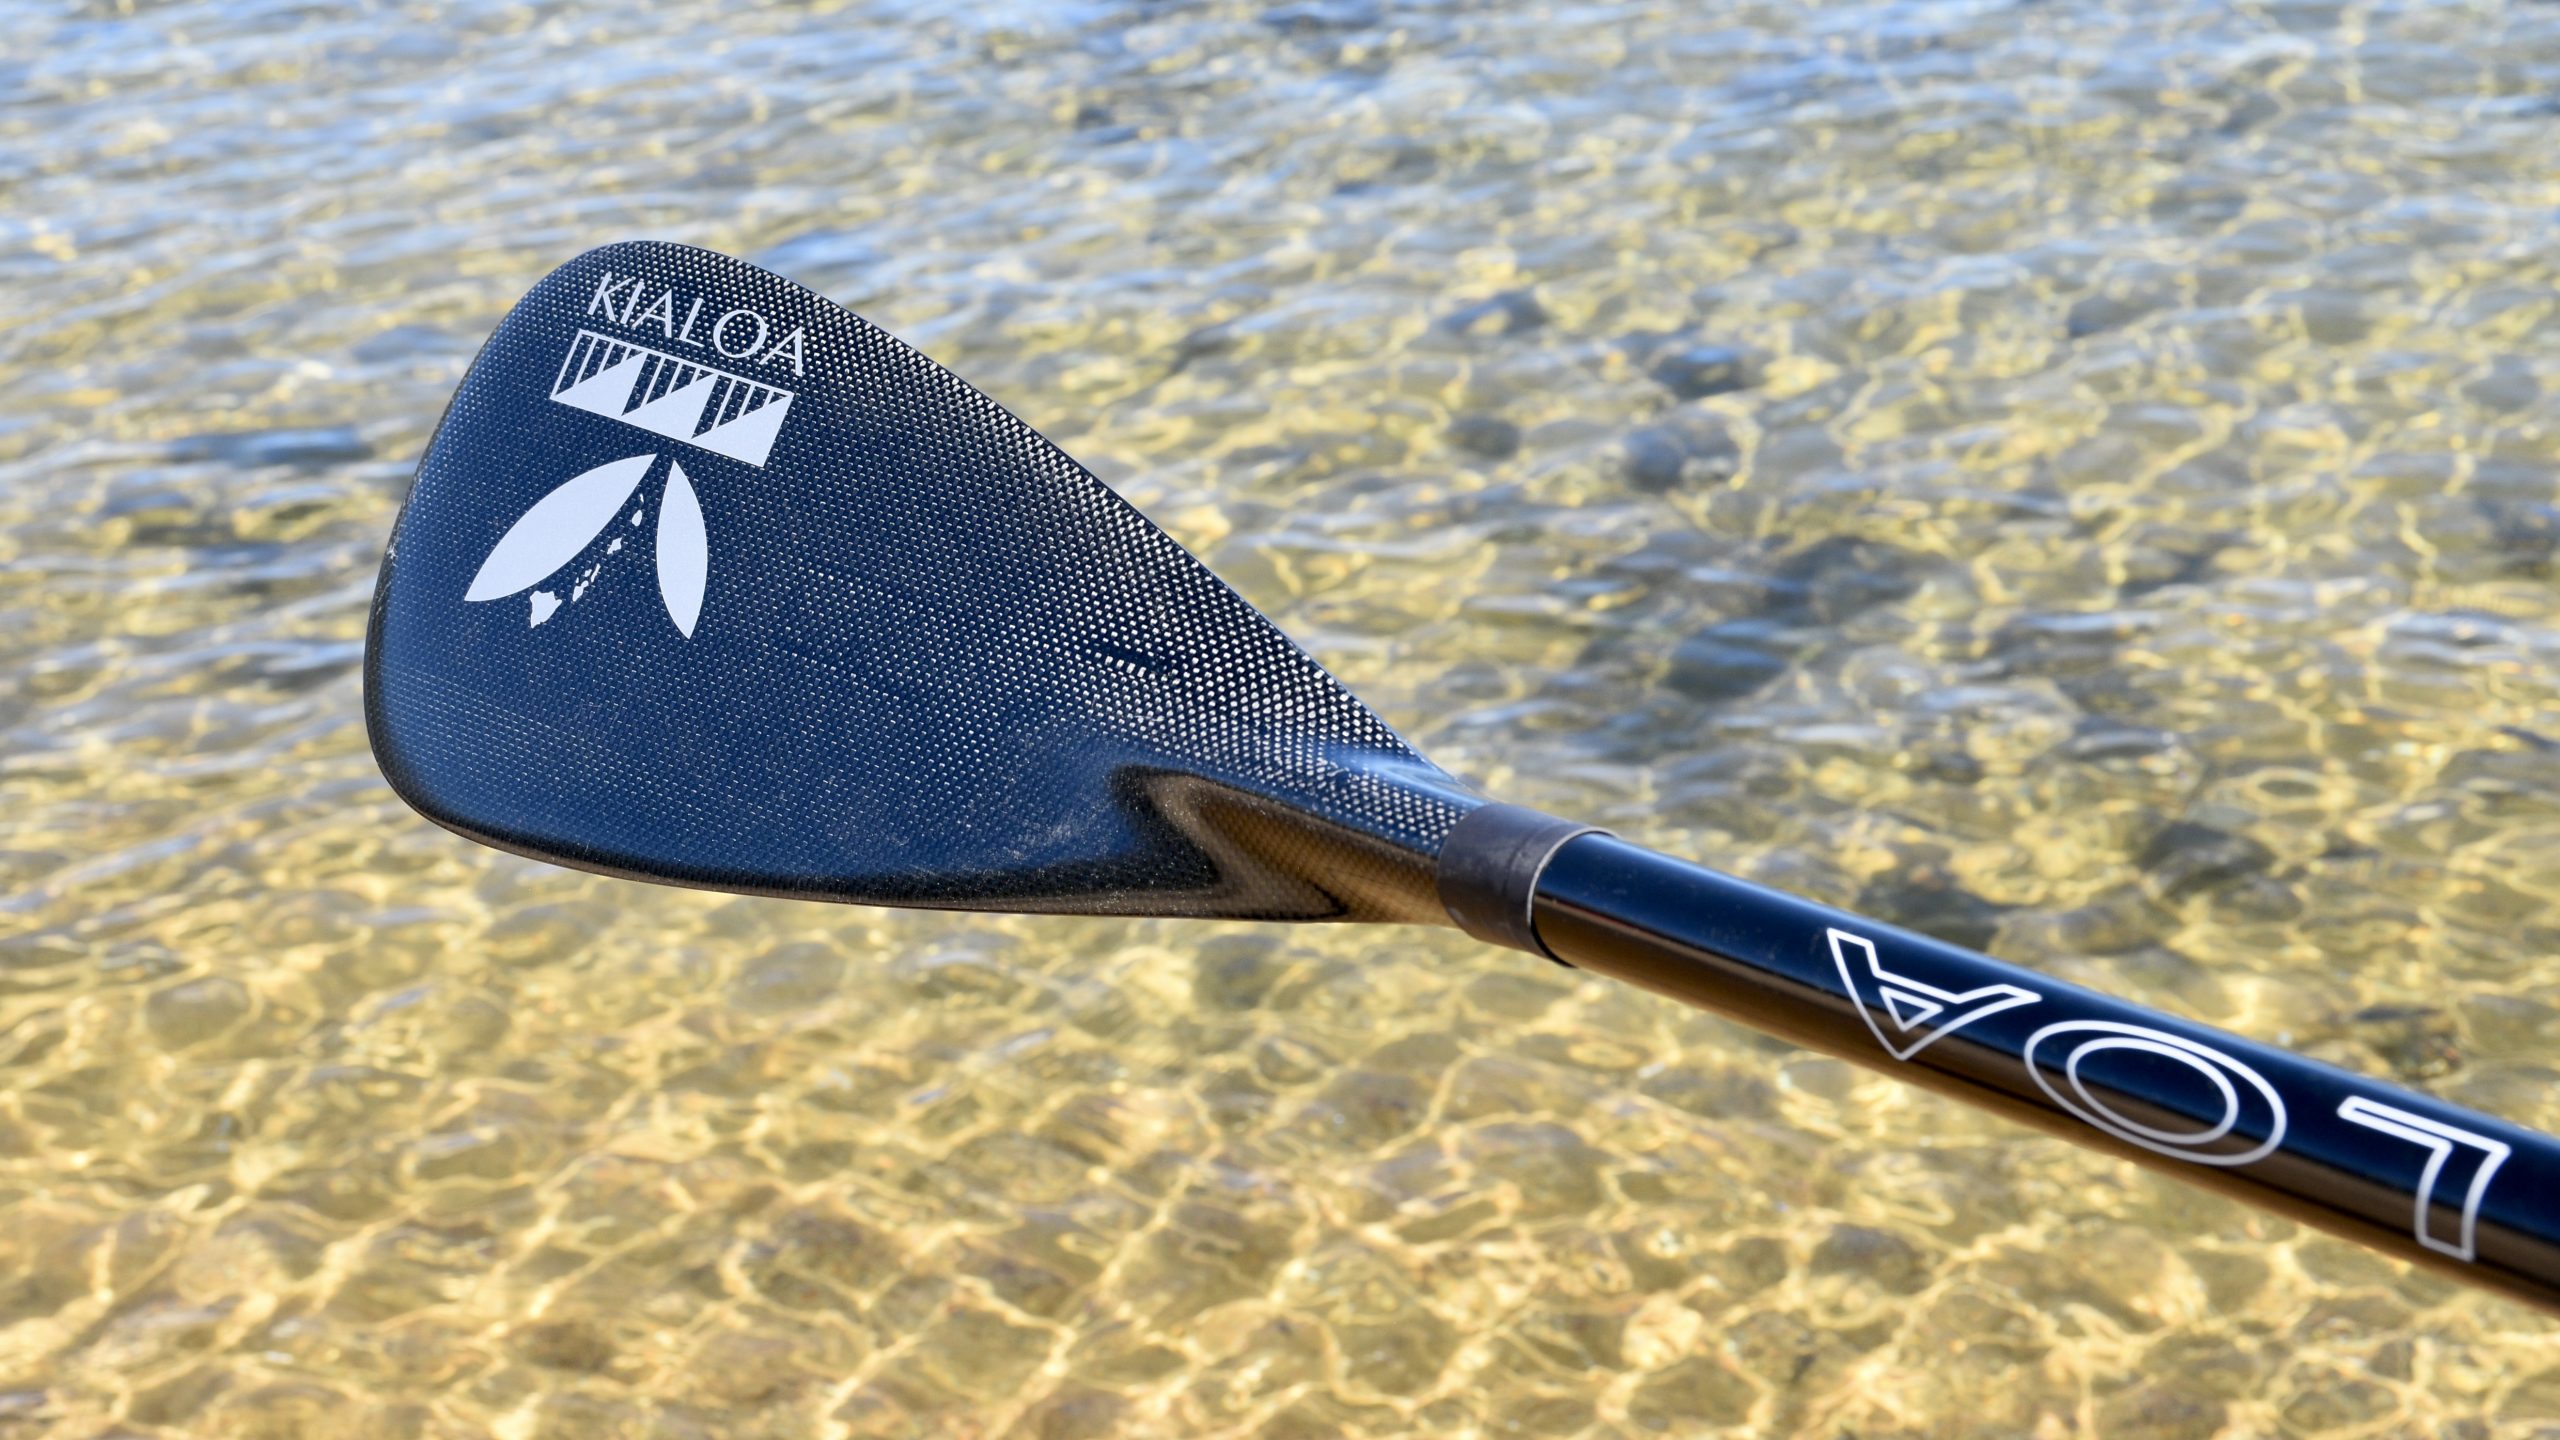 Showcasing the beautiful carbon fiber blade of the Kialoa Pipes II SUP paddle in front of Lake Tahoe